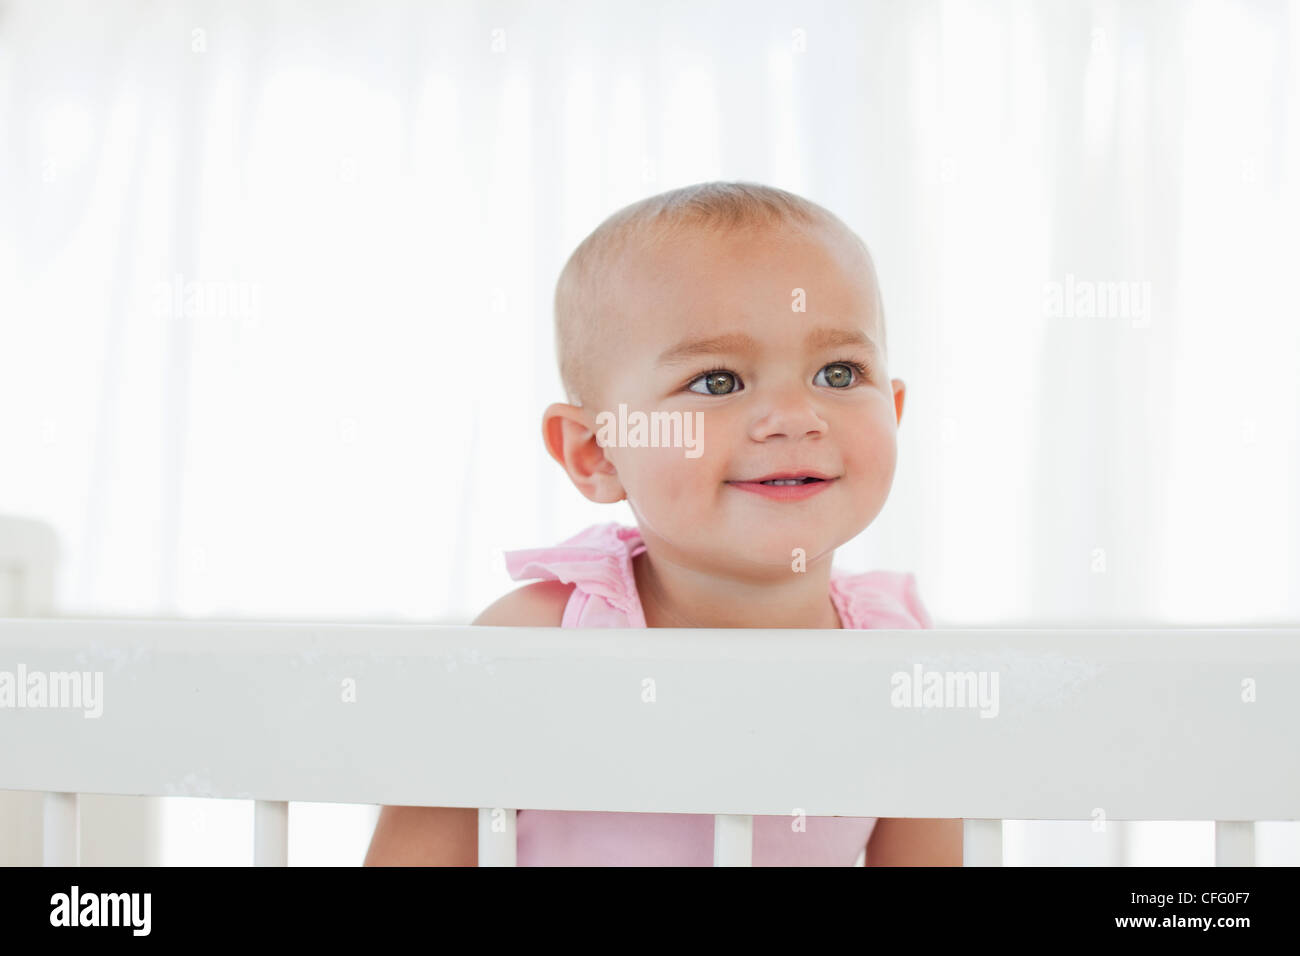 Smiling baby looking towards the side while standing in her bed Stock Photo